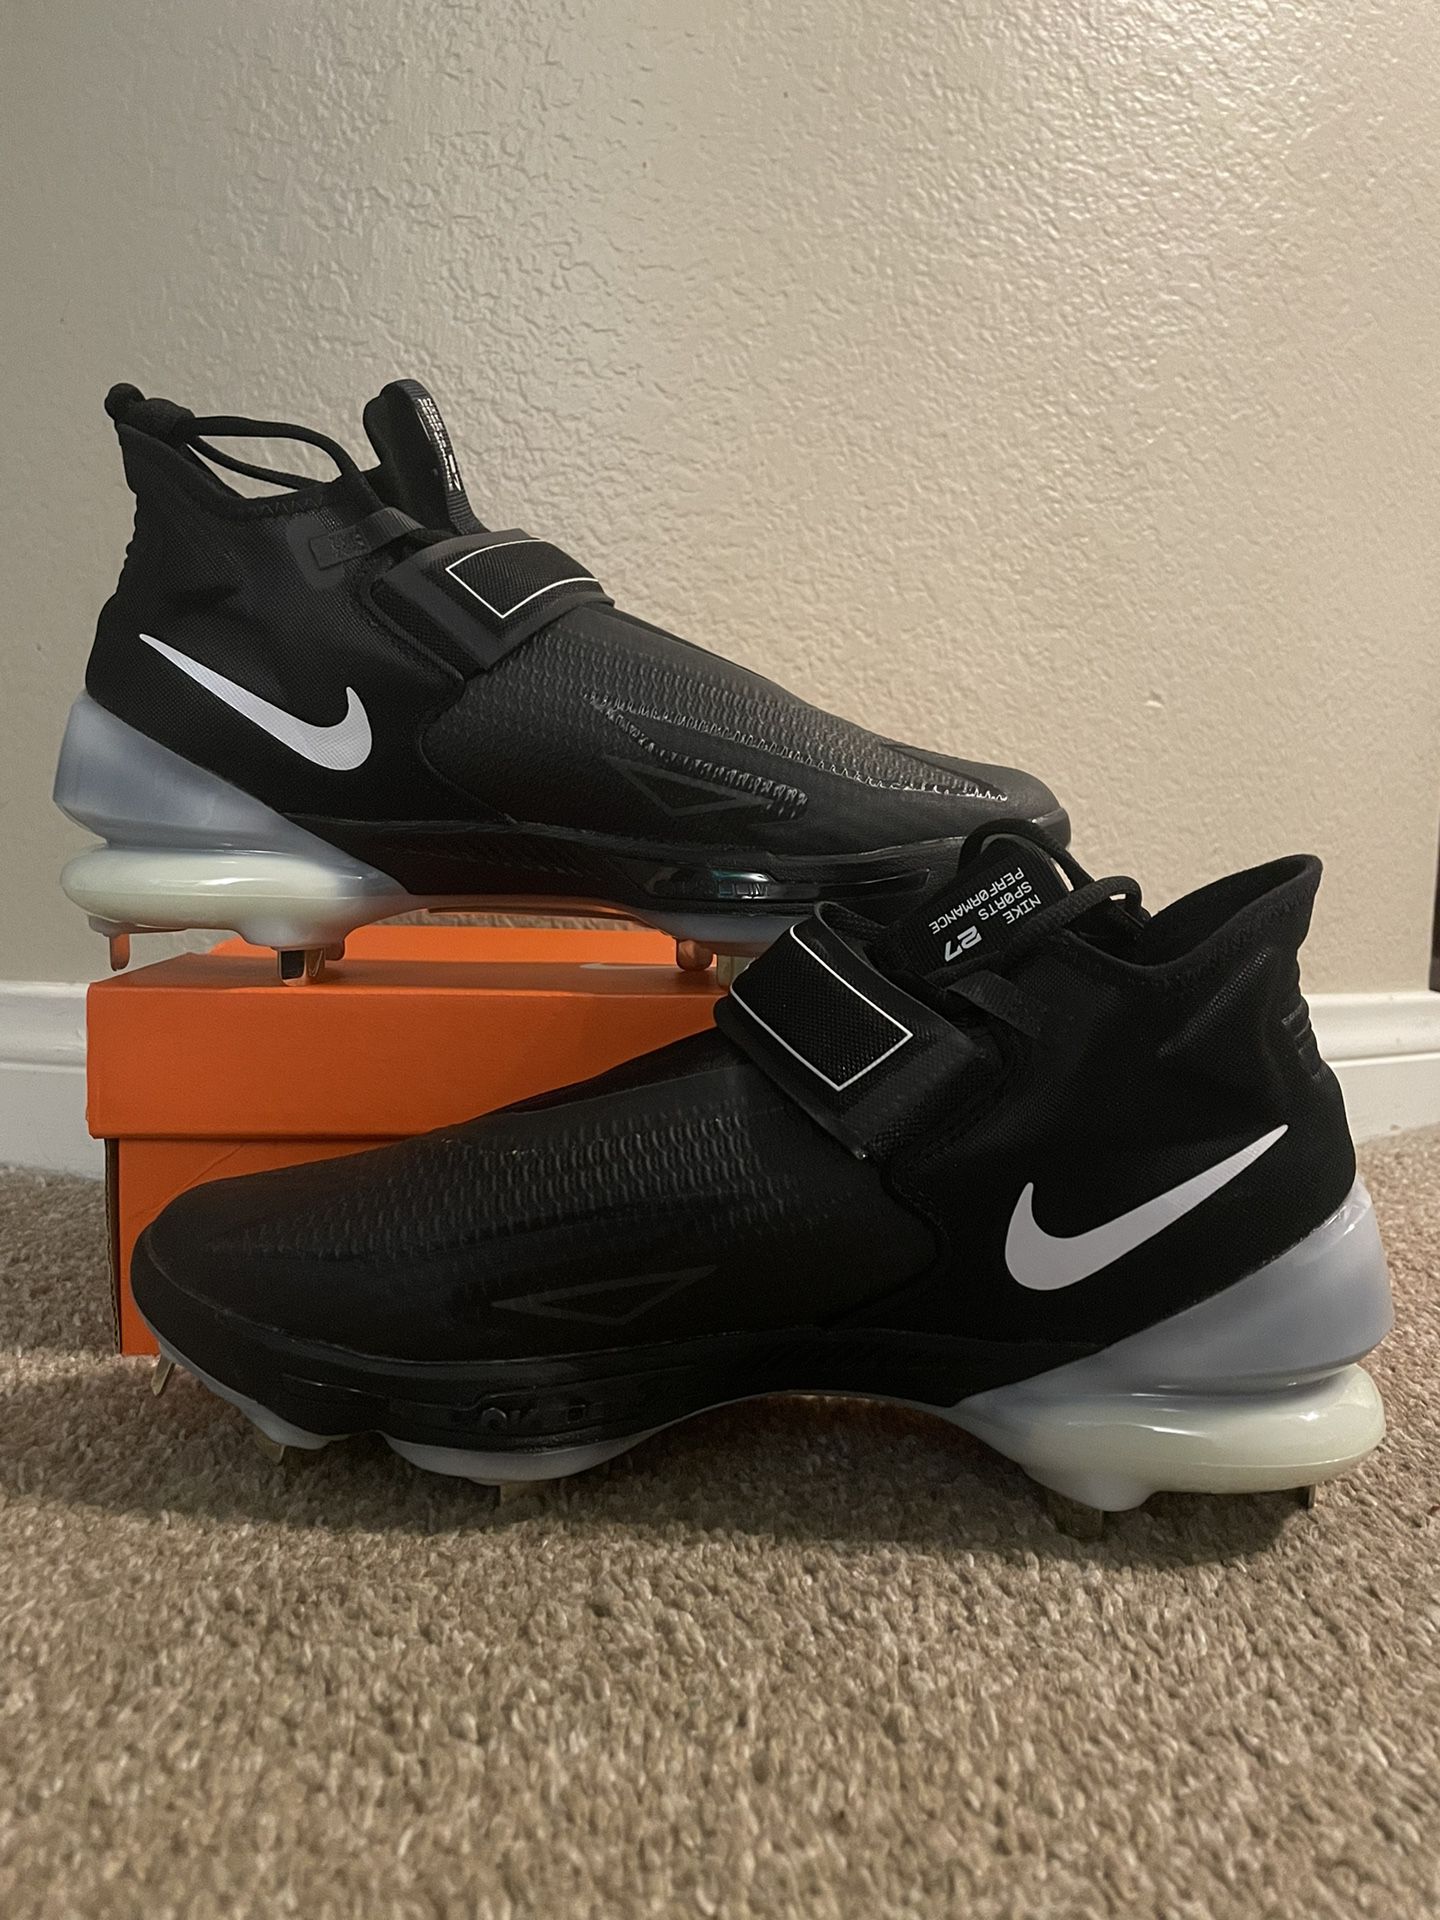 trout 27 baseball cleats for Sale in Lincoln Acres, CA - OfferUp